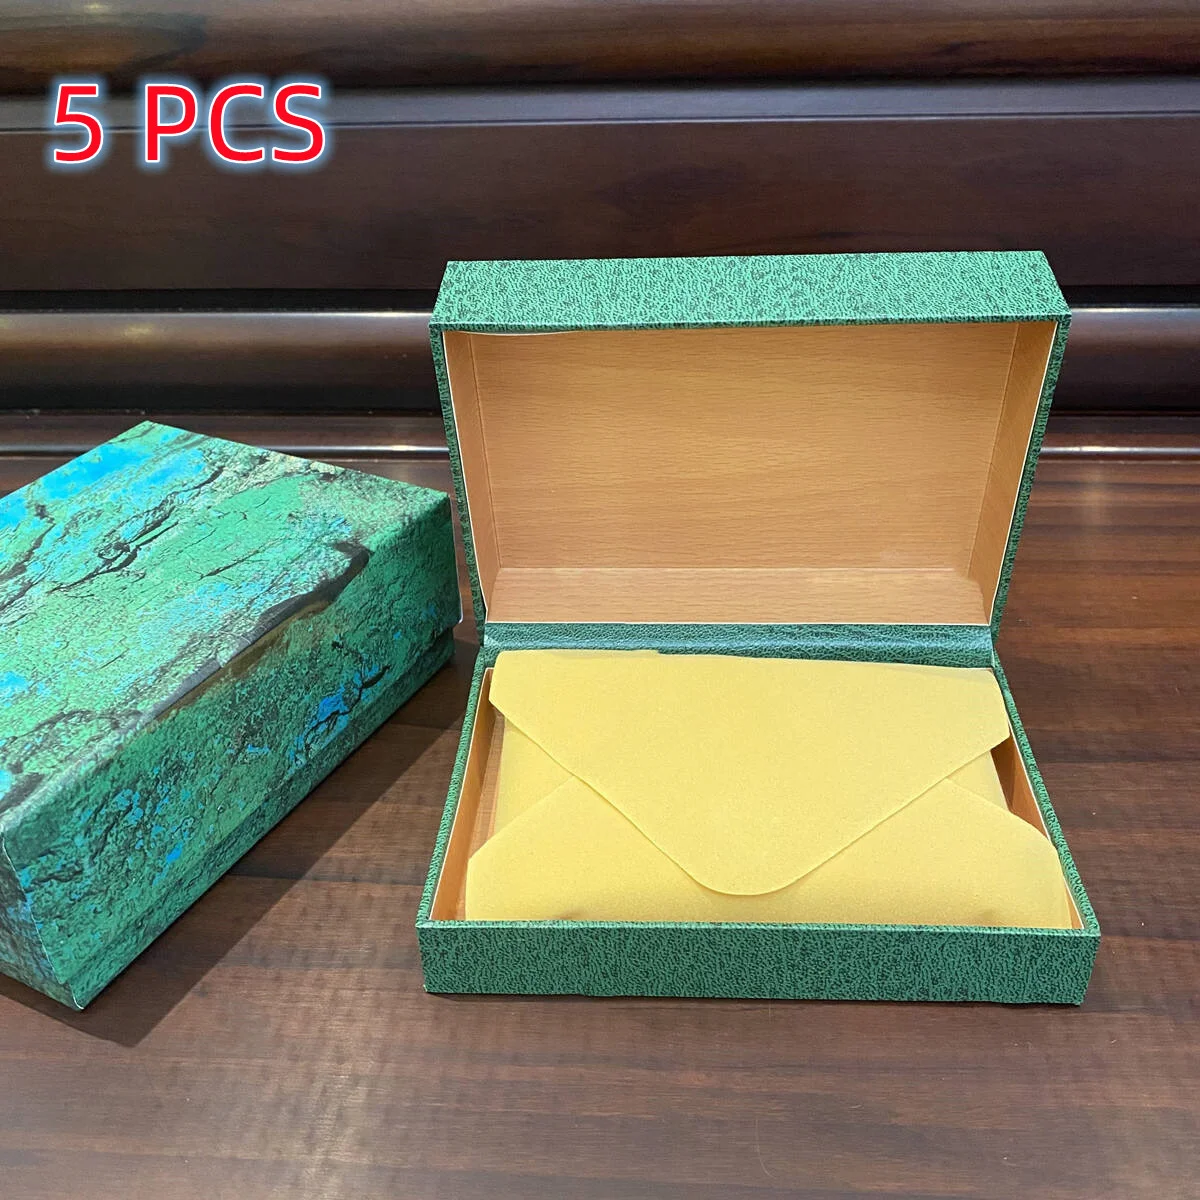 

Luxury Top Green Watch Box Quality Composite Wood Watch Boxes English Booklet Watch Packing Box